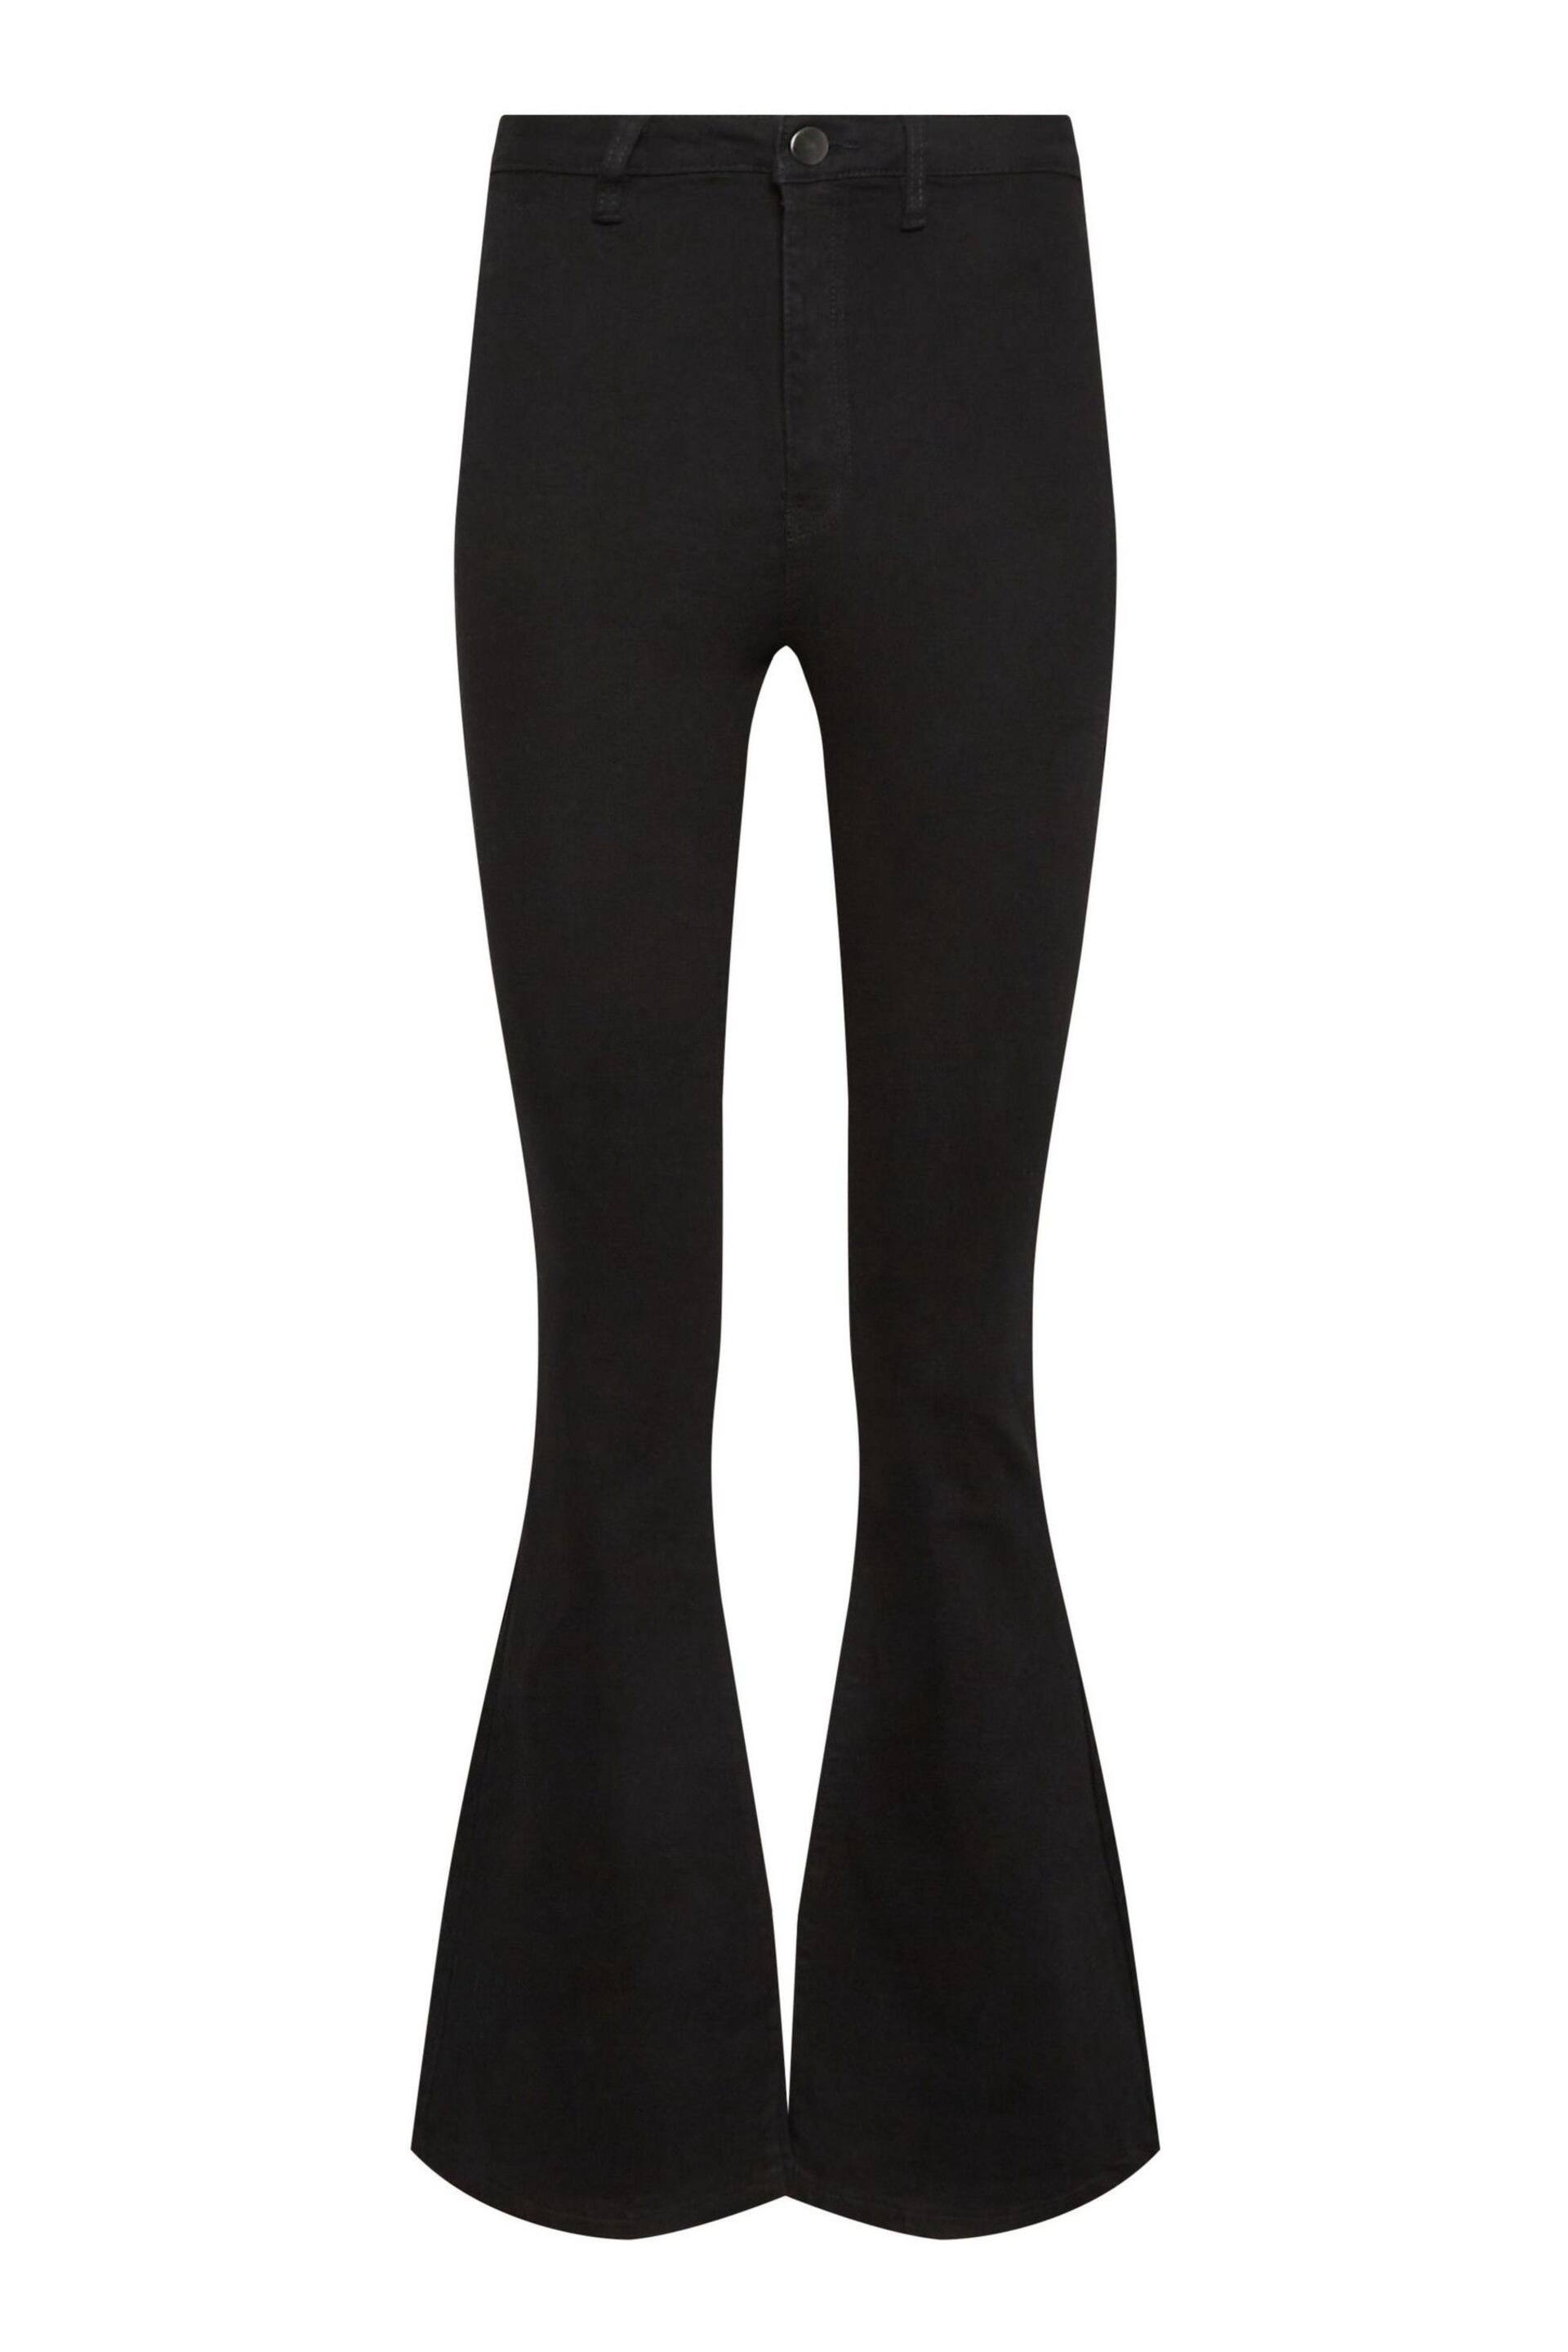 Long Tall Sally Black Denim Flared Jeans - Image 3 of 4